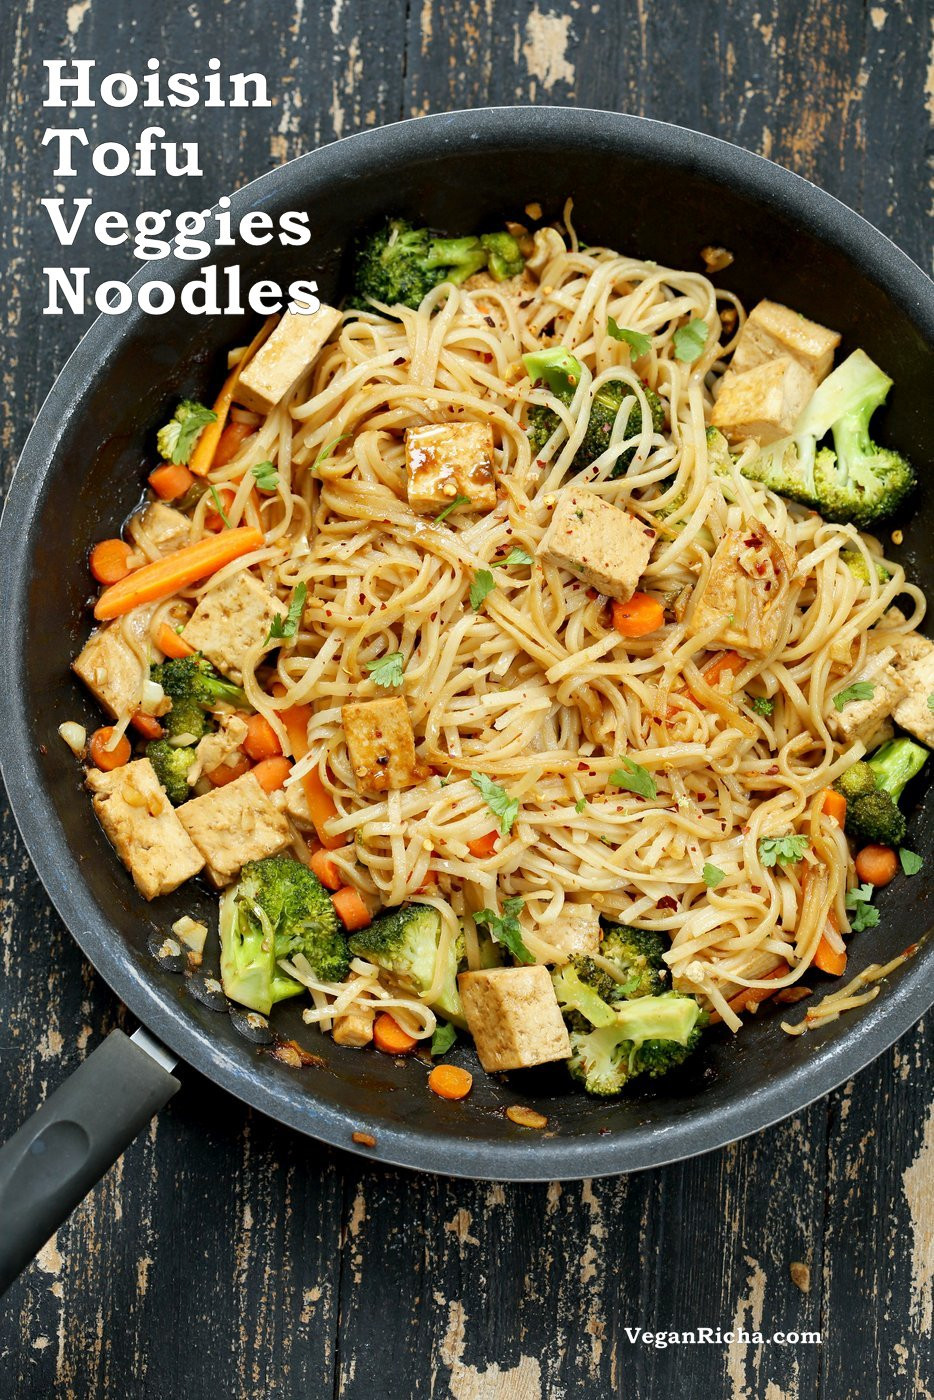 Recipes With Rice Noodles
 Tofu and Brown Rice Noodles in Hoisin Sauce Vegan Richa